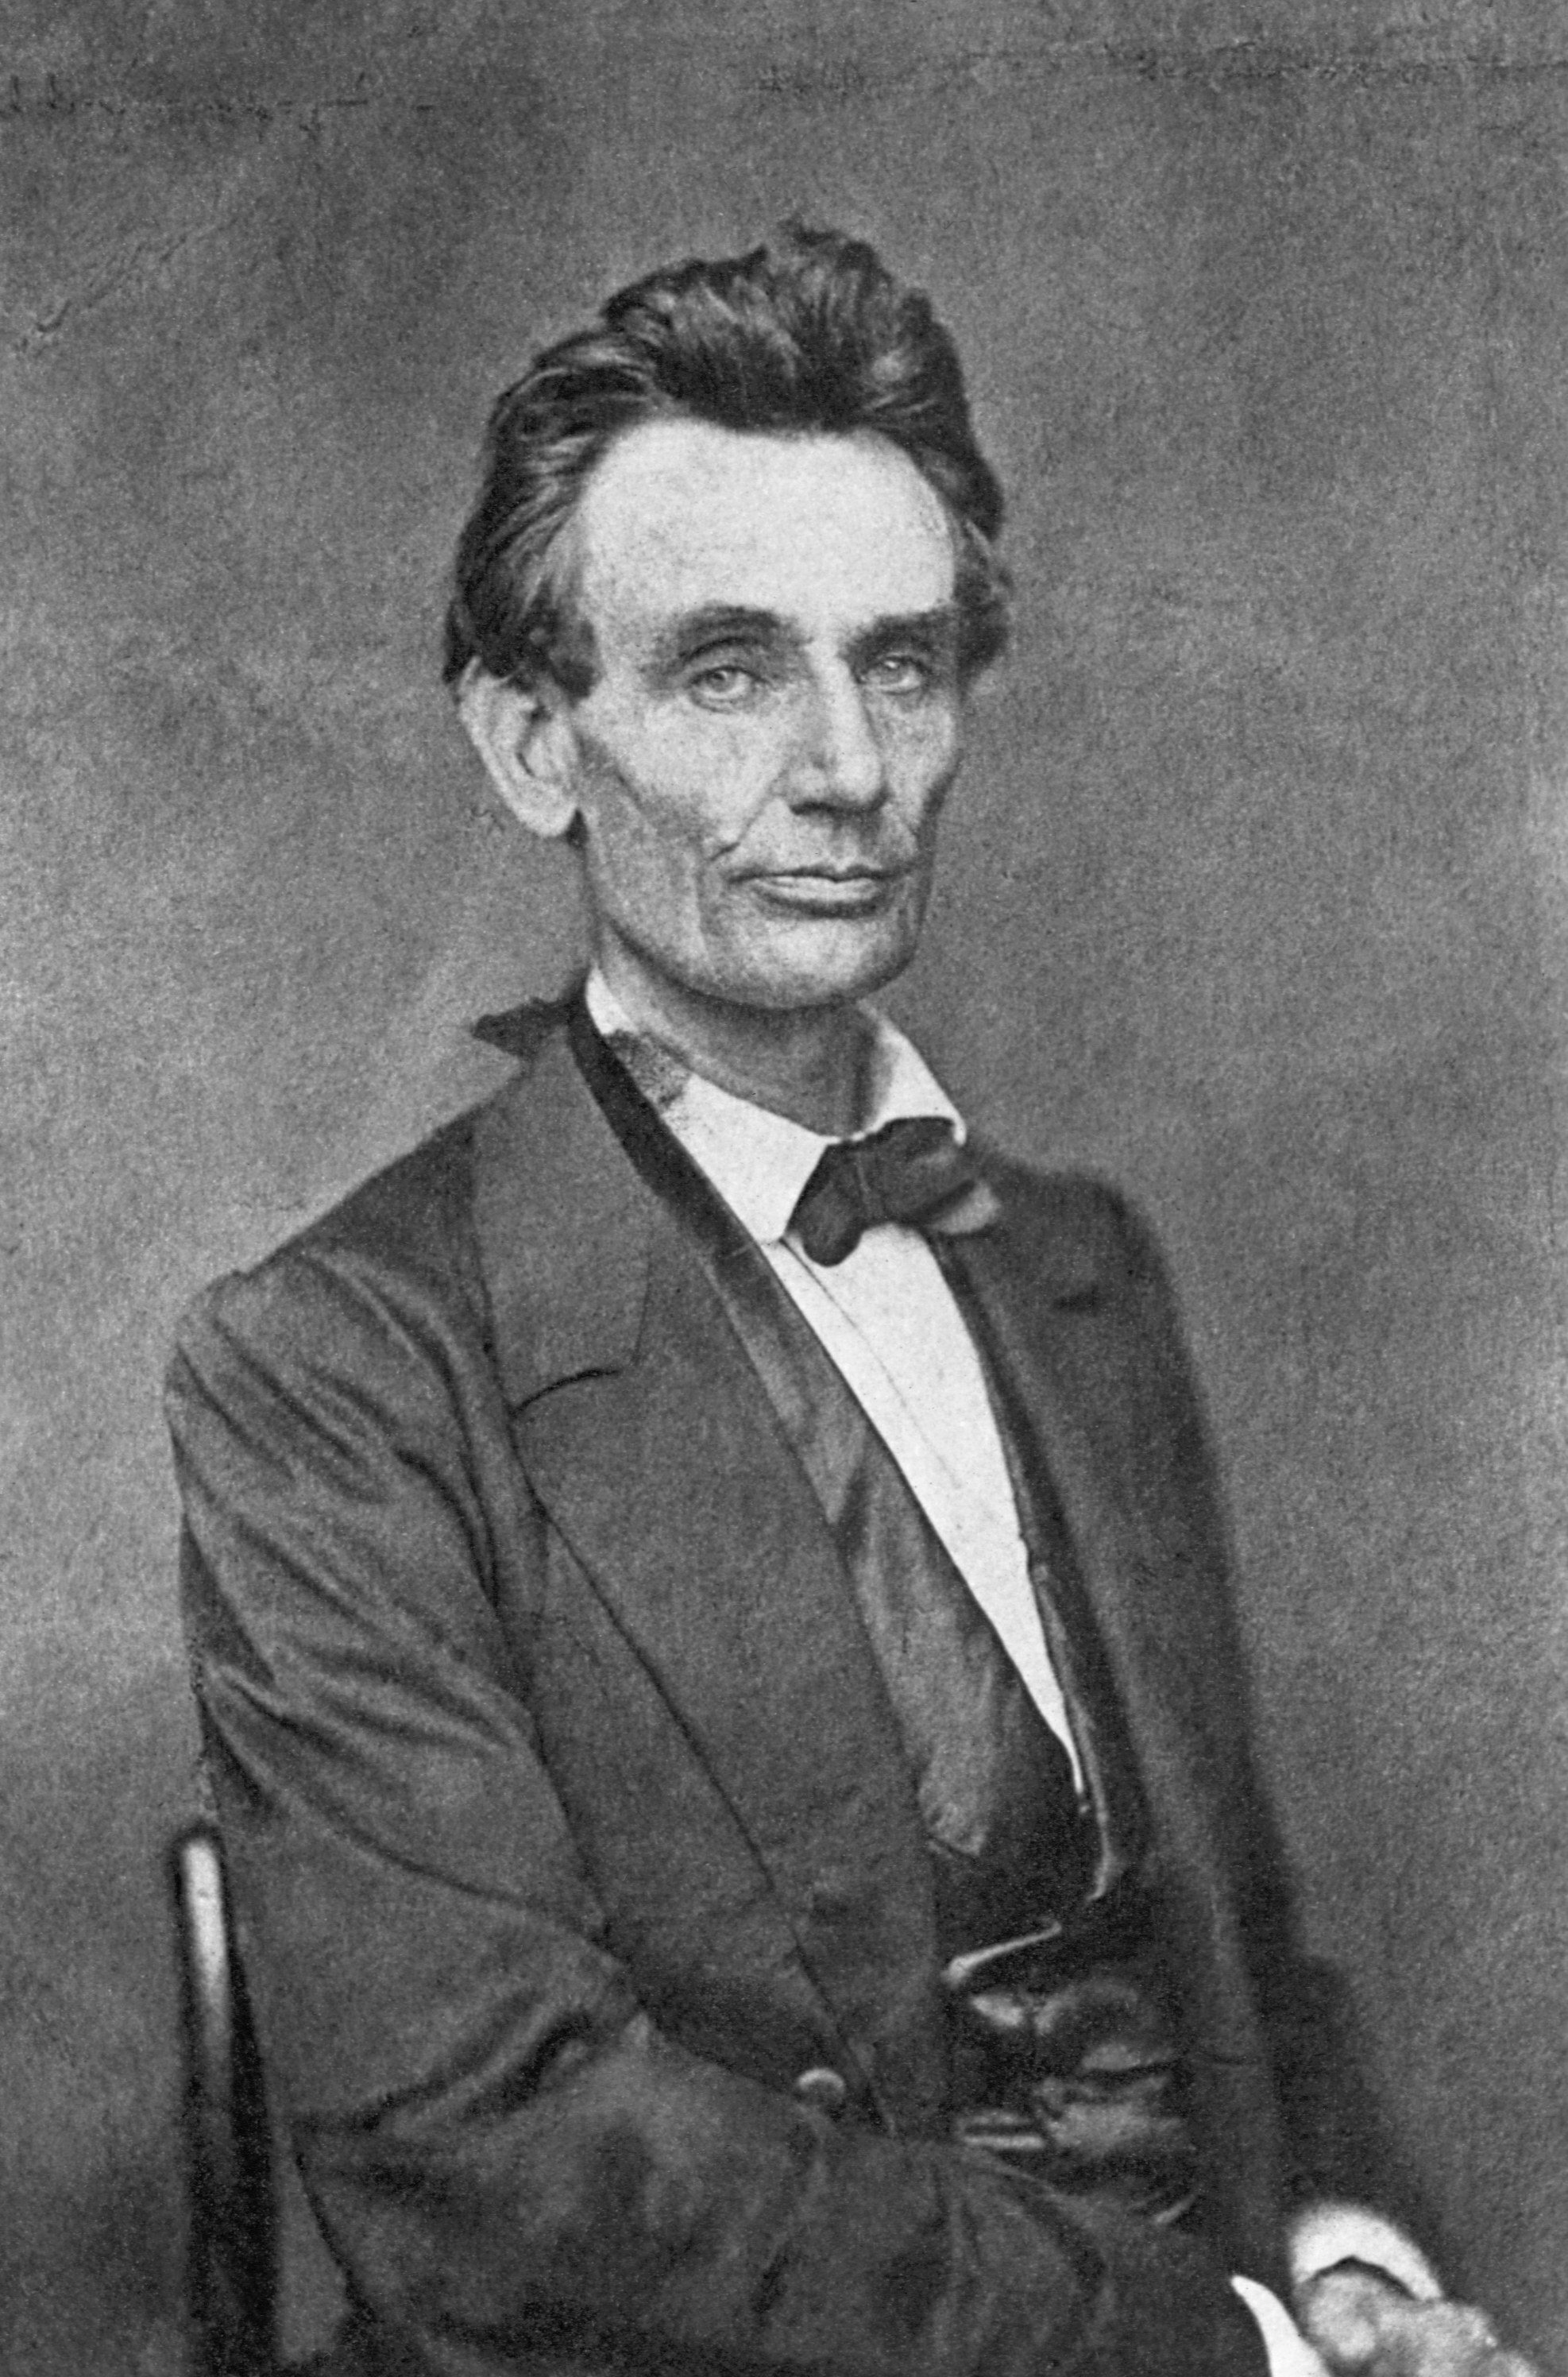 Abraham Lincoln, whowas killed in 1865 by John Wilkes Booth. (Photo: Corbis via Getty Images